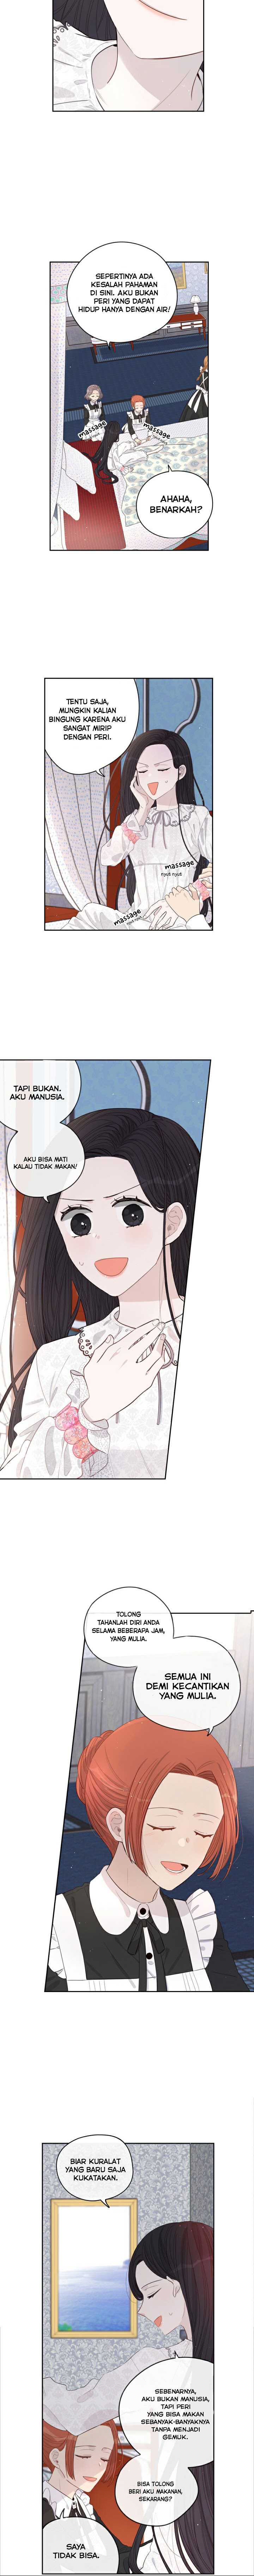 The Black Haired Princess Chapter 2